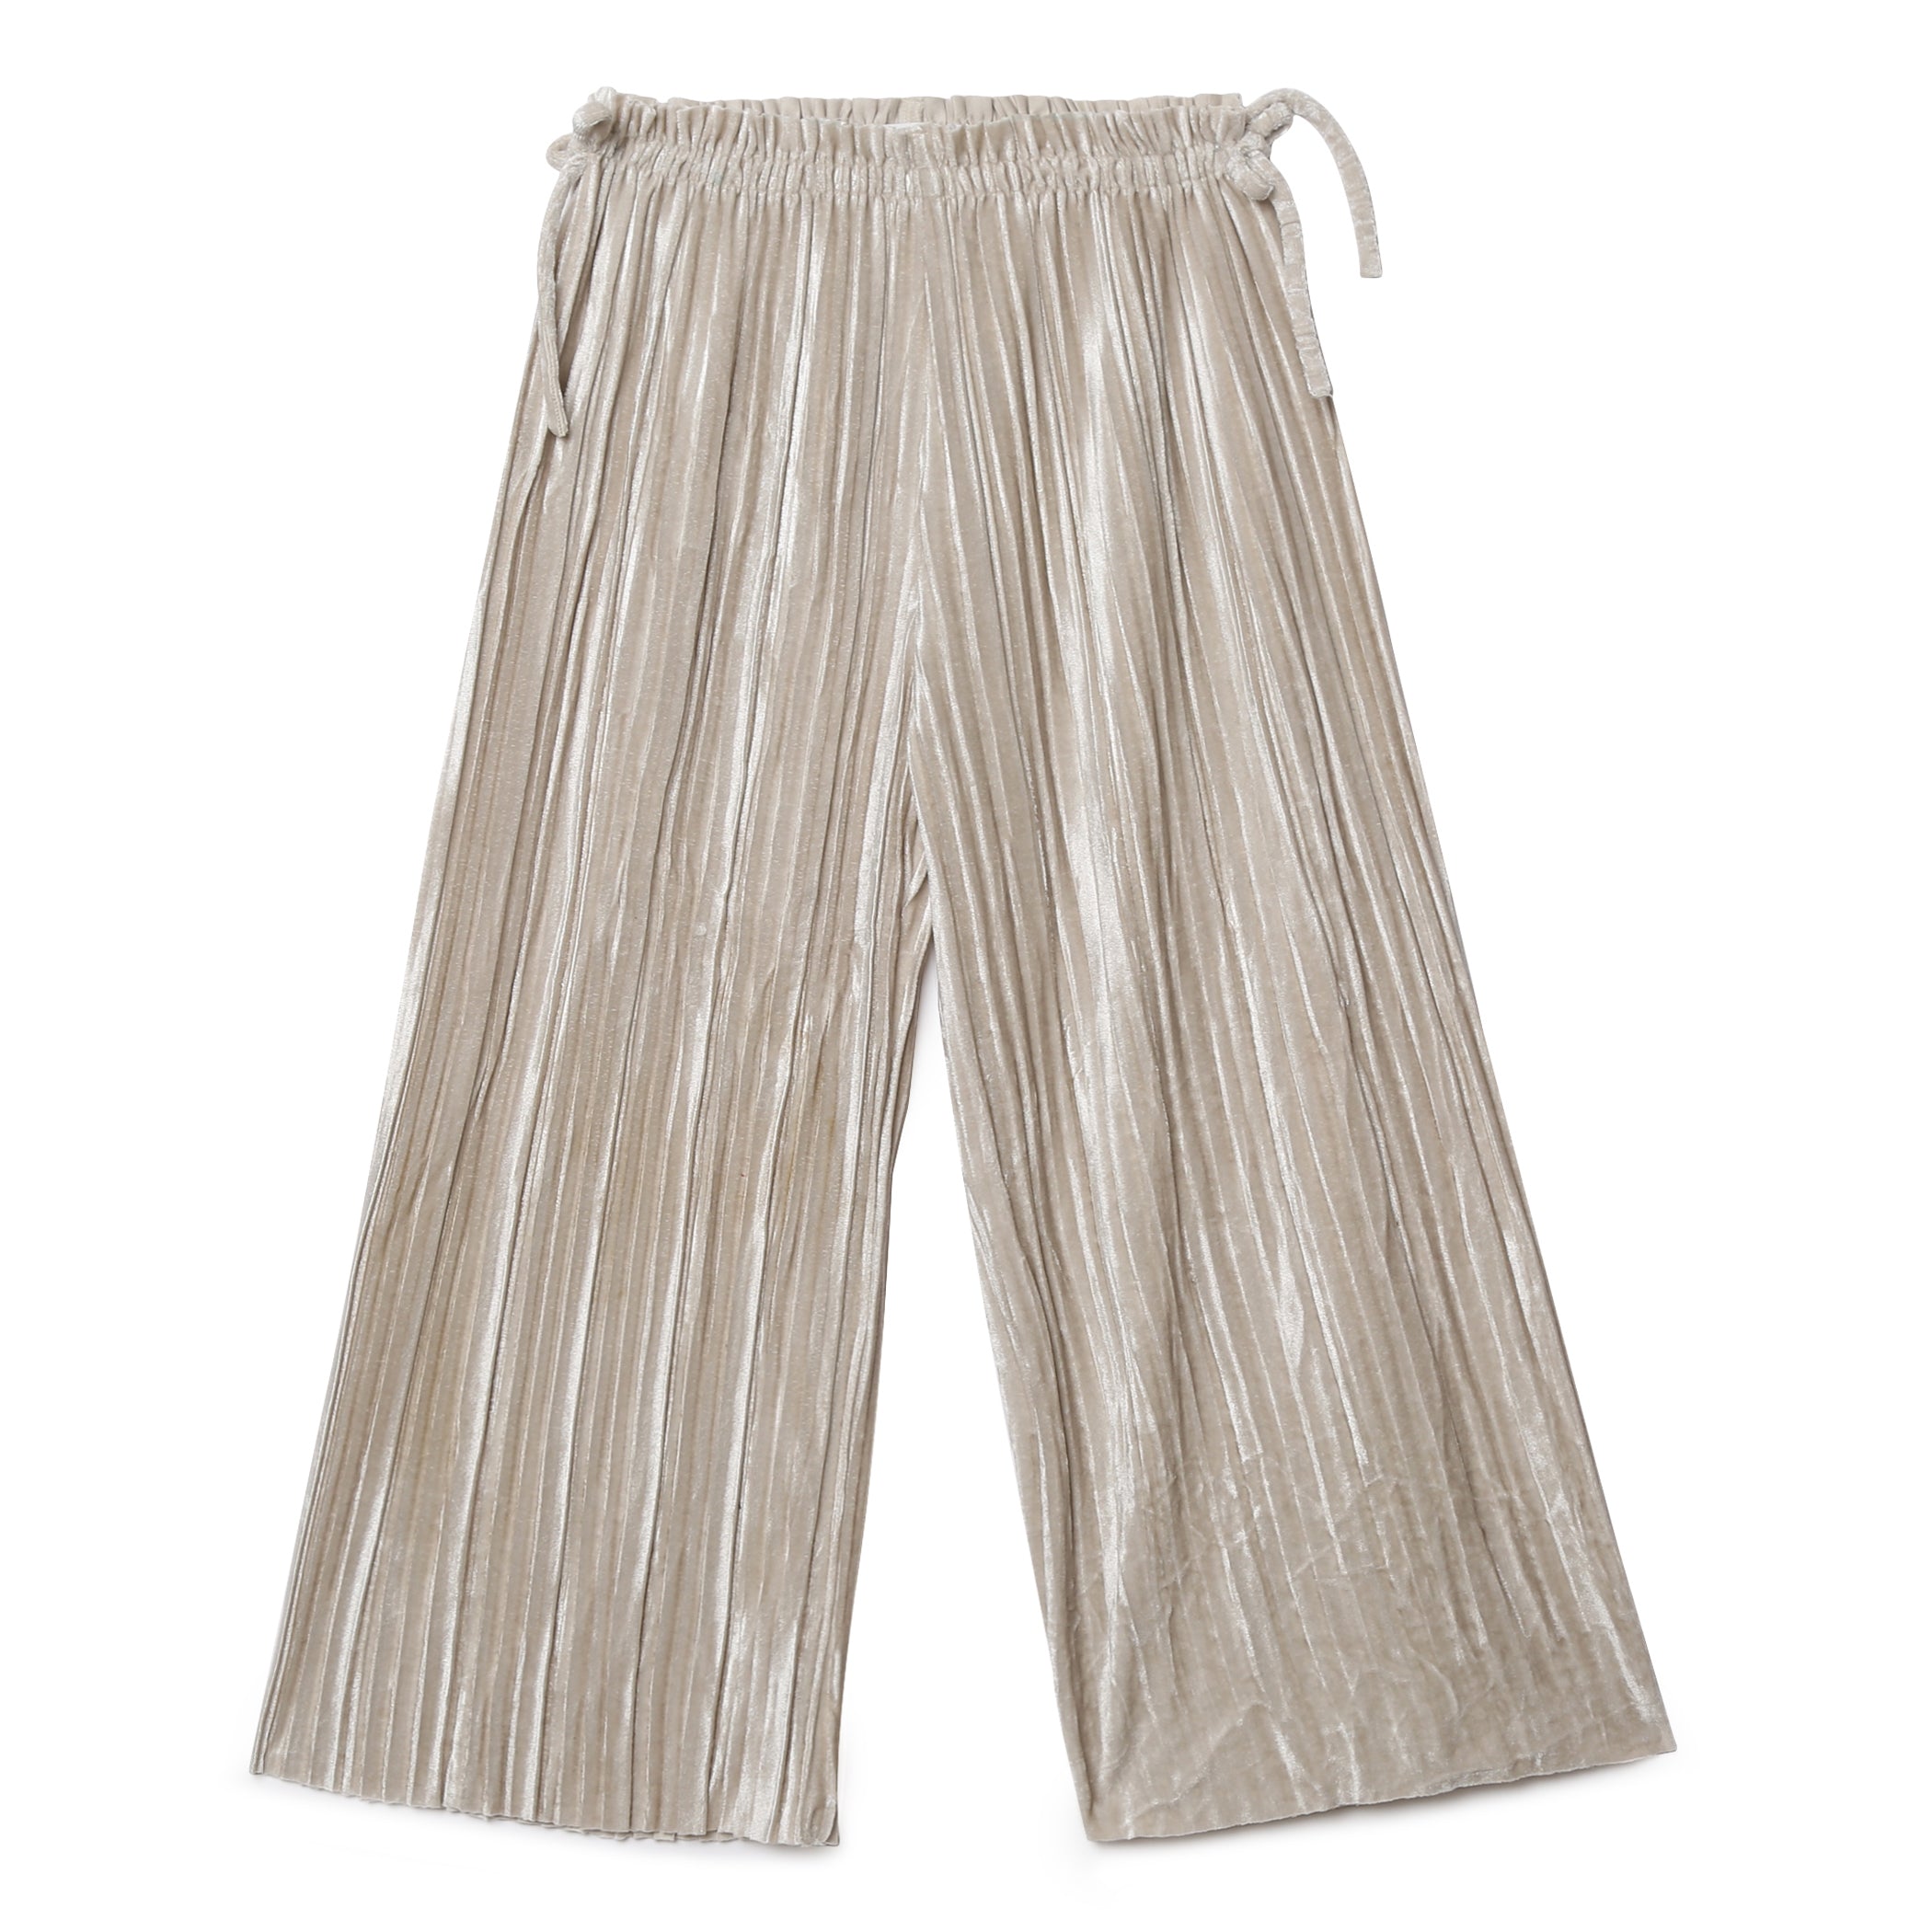 Pleated Metallic Pants | Metallic pants, Metallic trousers, Wide trousers